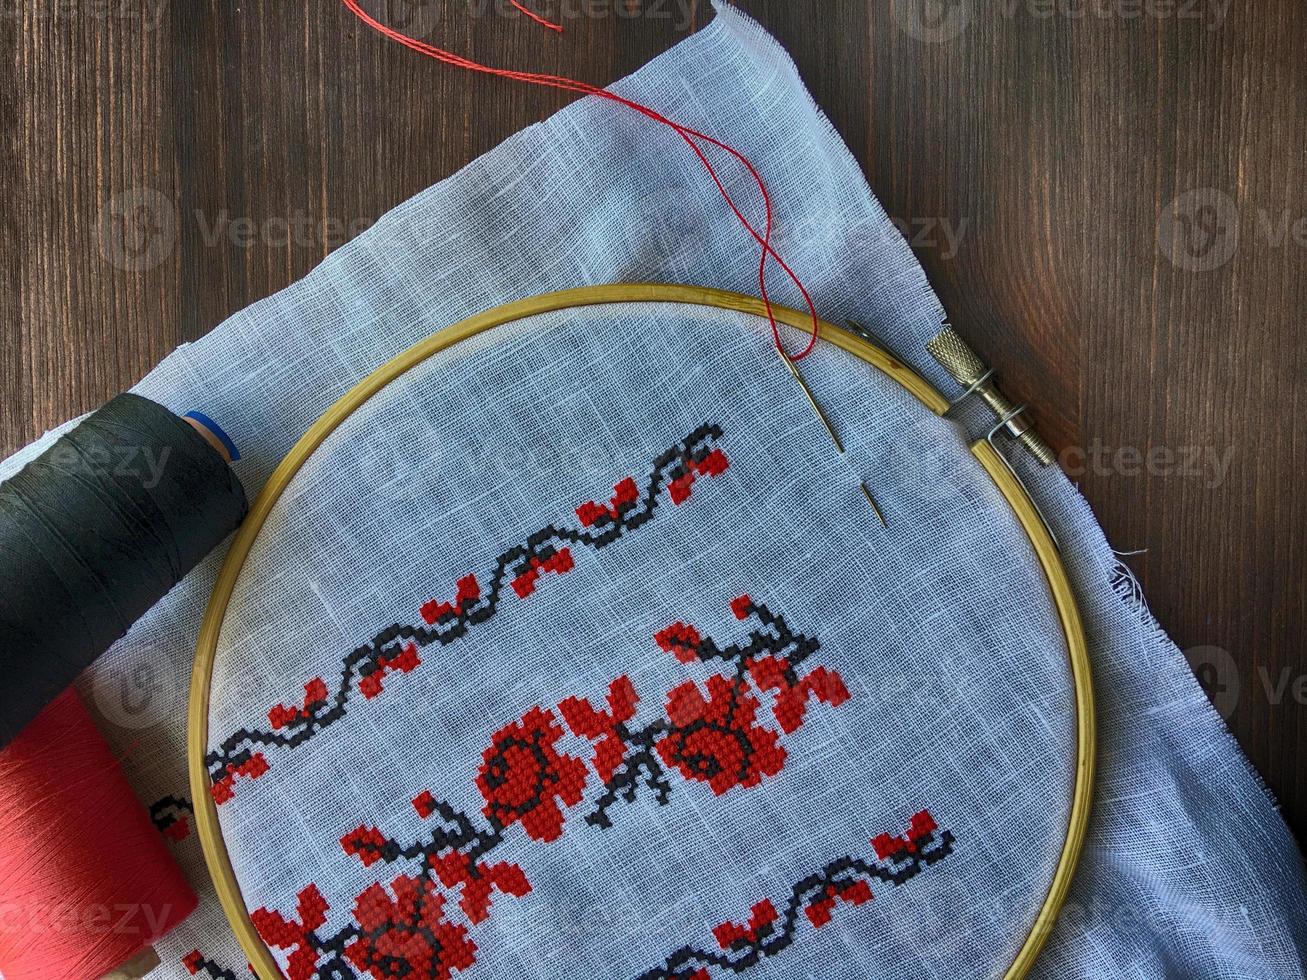 fabric in the wooden embroidery hoop with traditional folk embroidery Ukraine, top view photo